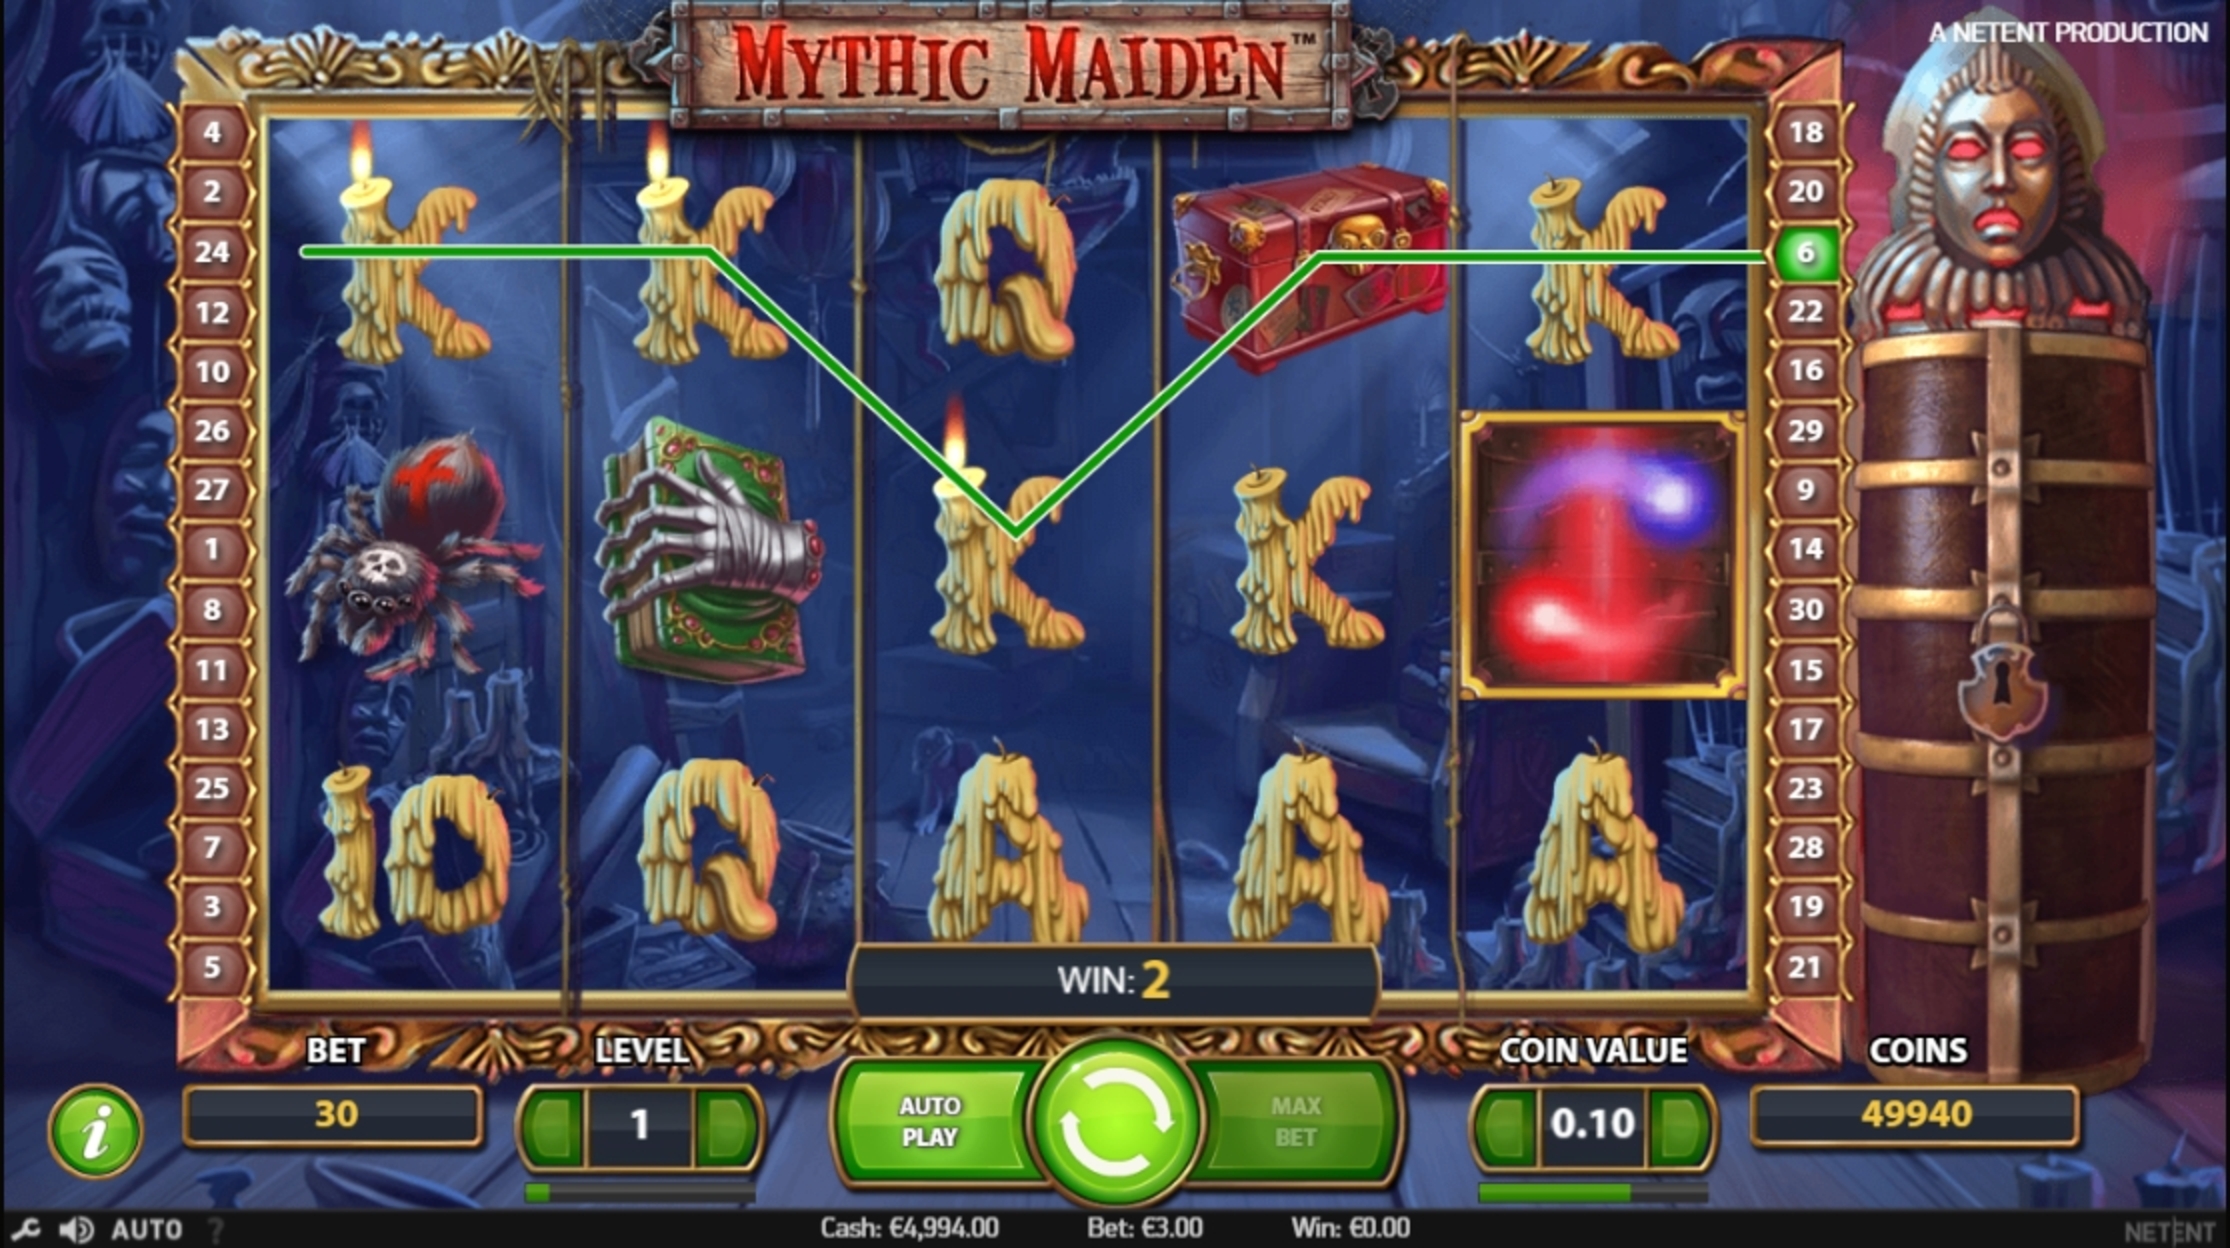 Win Money in Mythic Maiden Free Slot Game by NetEnt